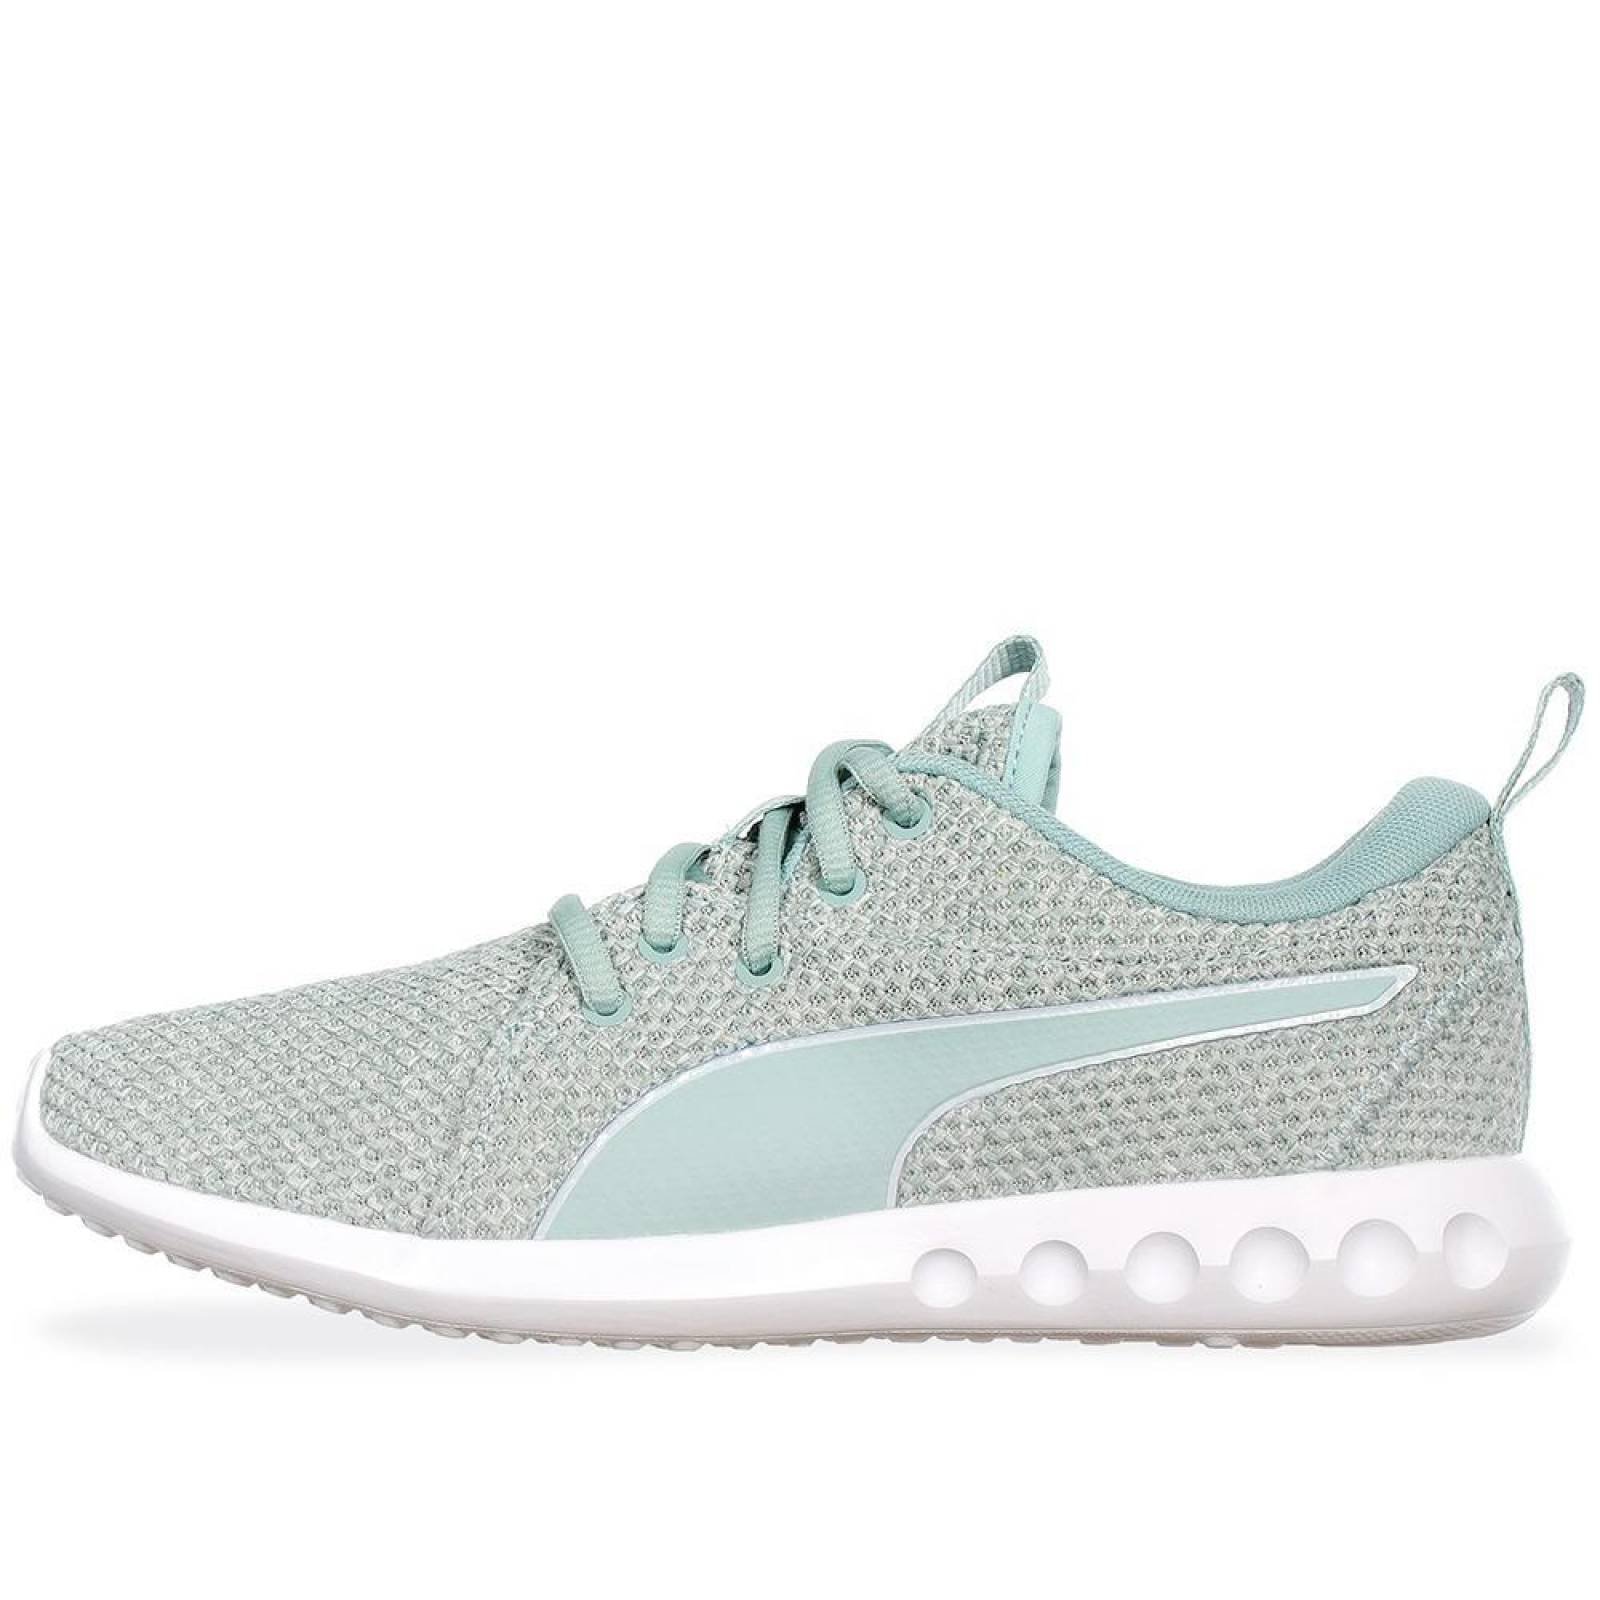 Tenis Puma Carson 2 Nature Knit - 19052503 - Verde Pastel - Mujer 